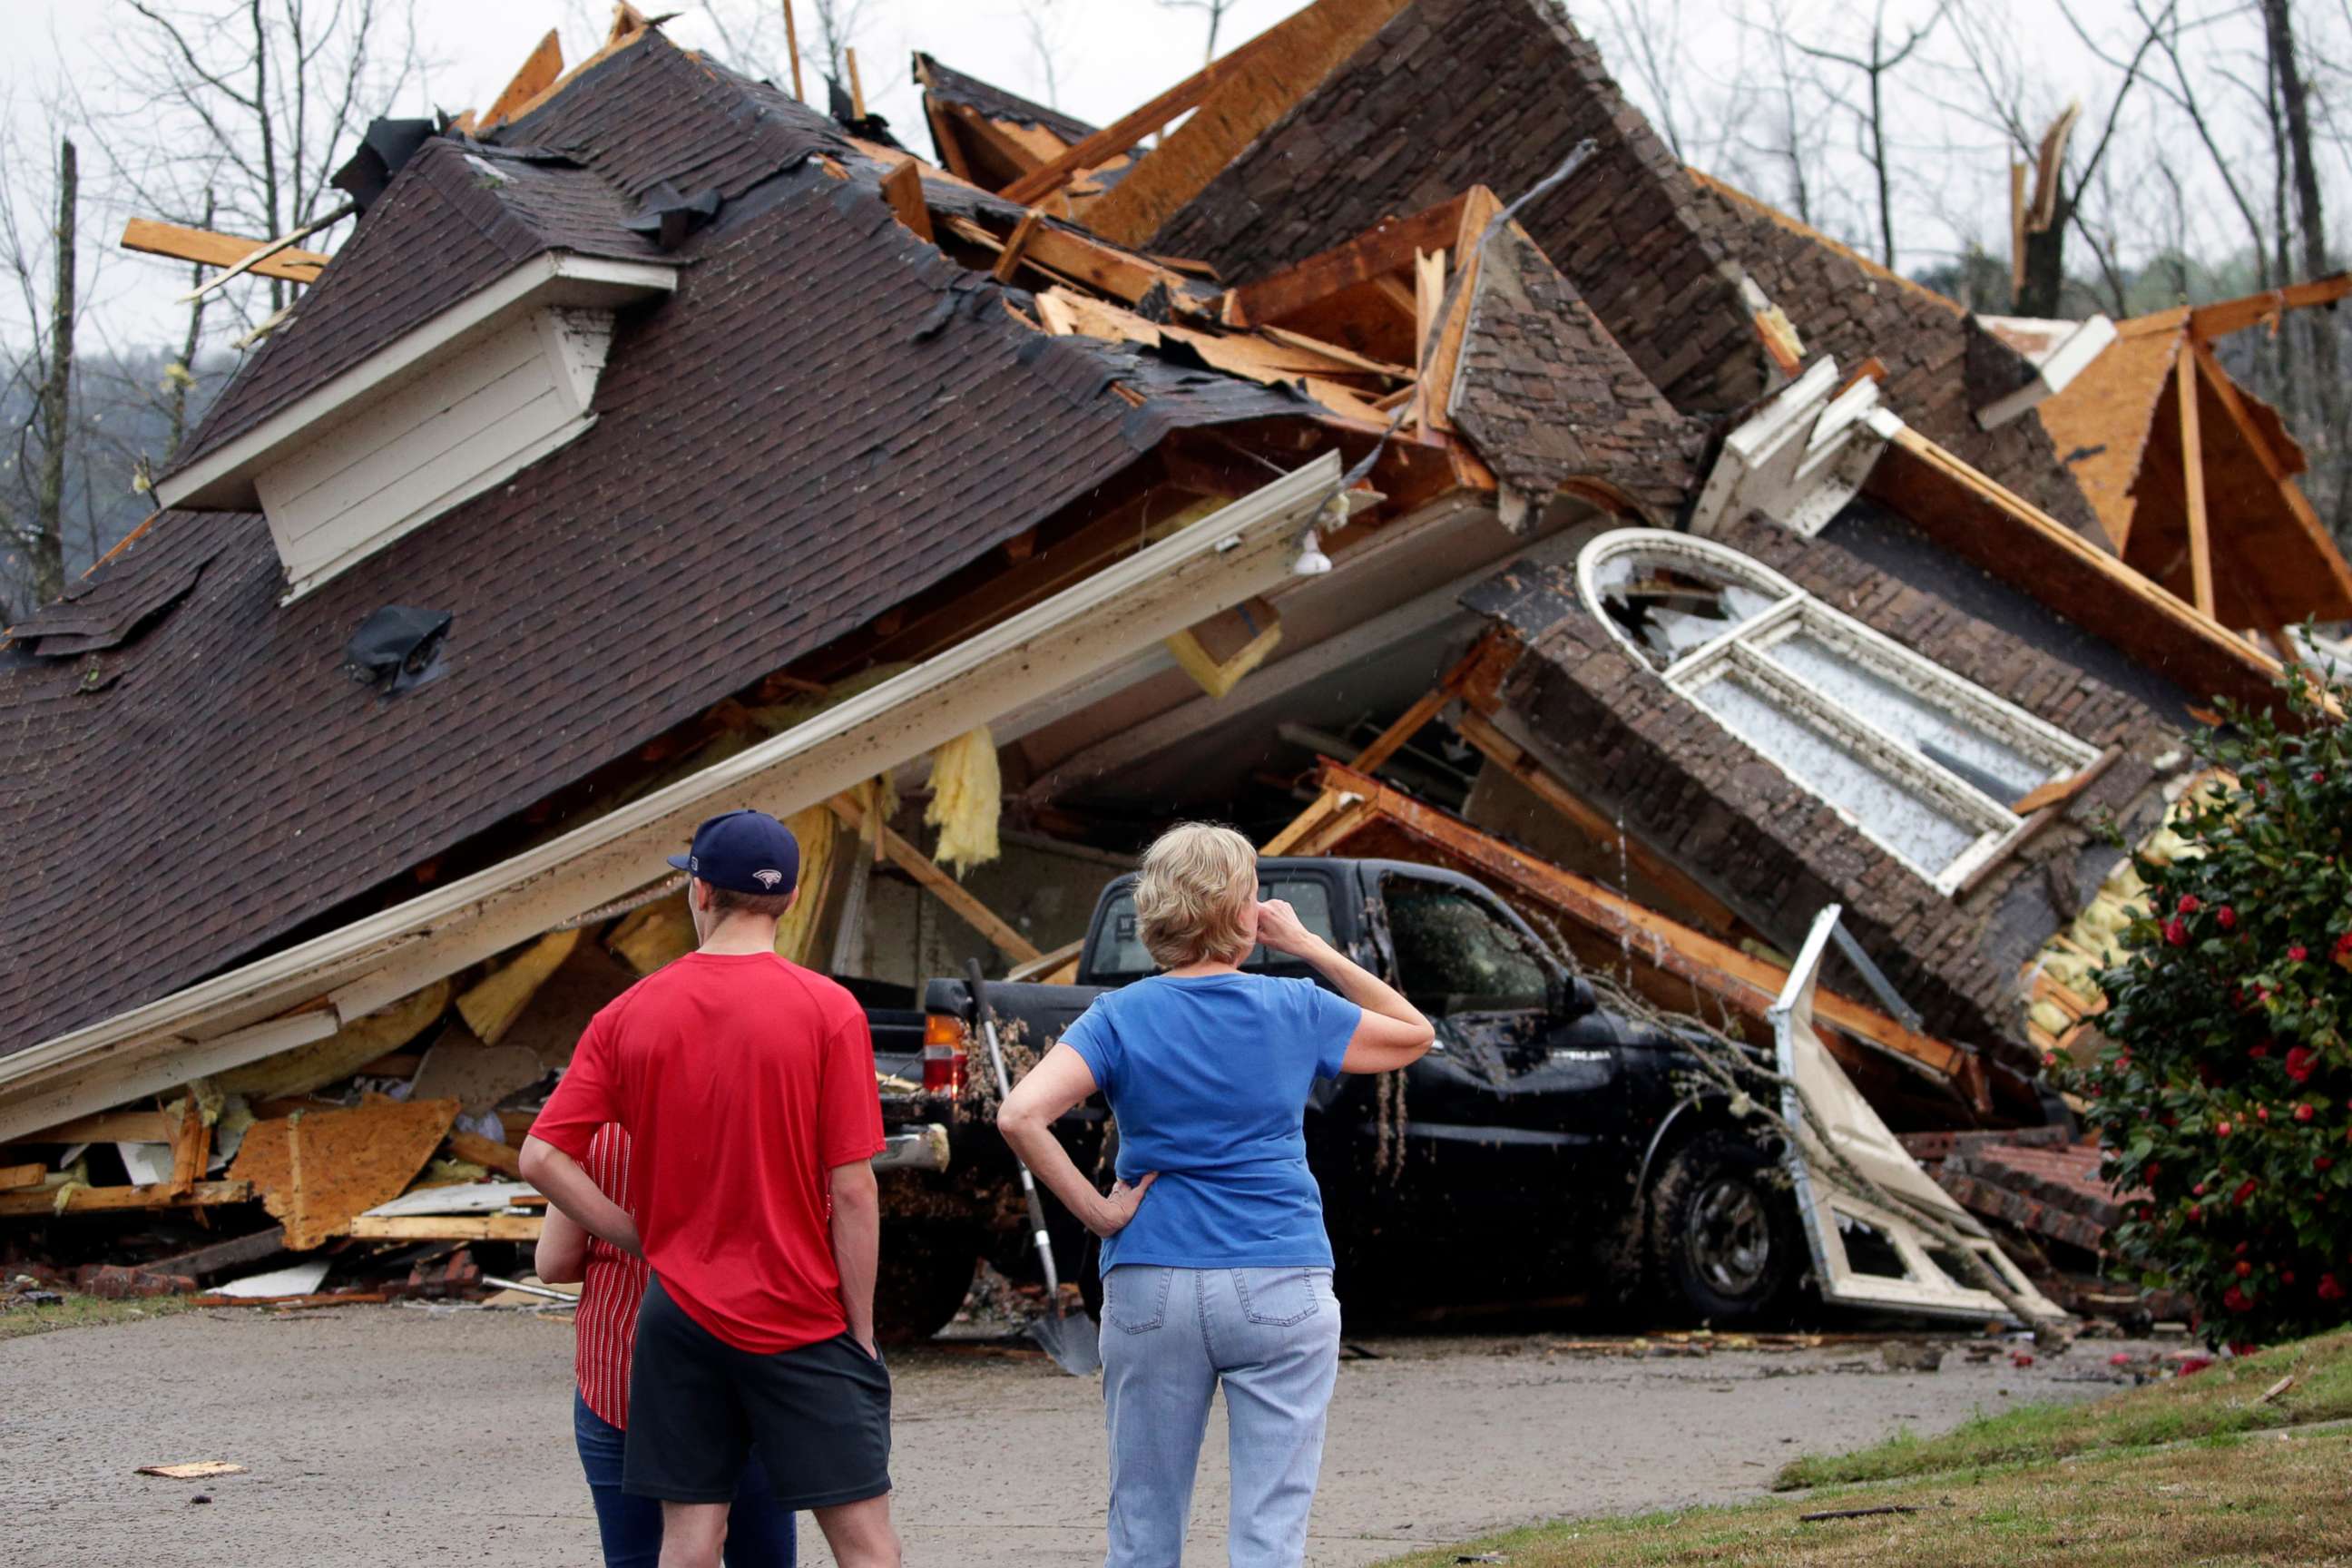 PHOTO: Residents survey damage to homes after a tornado touches down south of Birmingham, Ala. in the Eagle Point community damaging multiple homes, March 25, 2021.